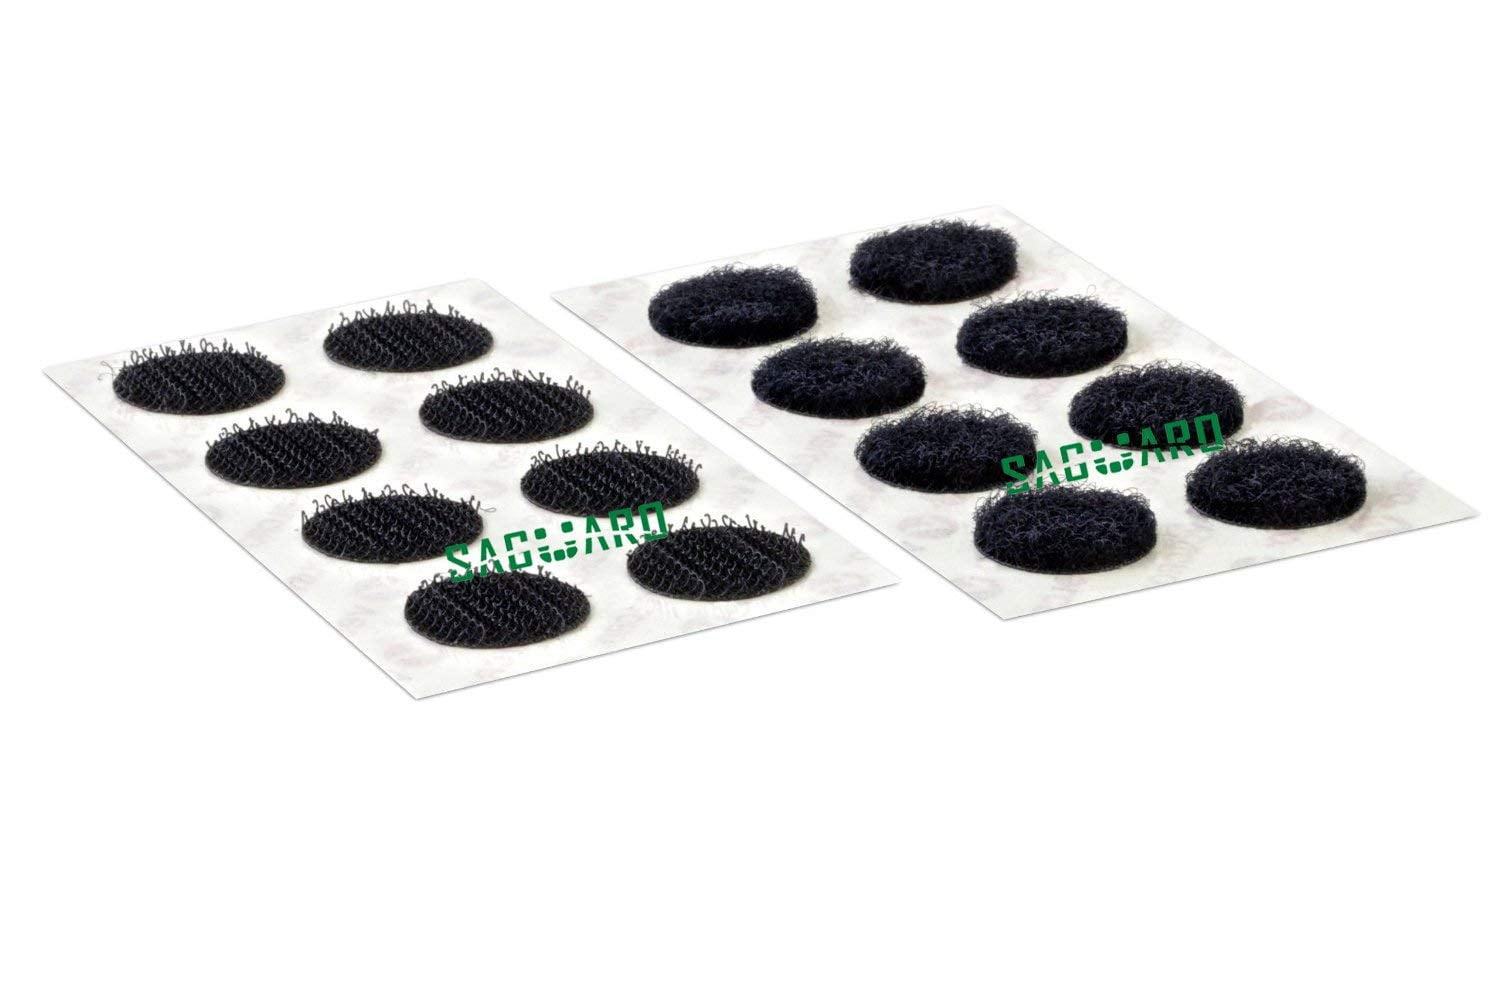 Office 15 mm and 20mm Diameter Sticky Back Coins Hook & Loop Self Adhesive Dots Tapes Magic Sticky Dots Home 10 mm Suitable for School Classroom Self Adhesive Dots Black, 10 mm,500 sets